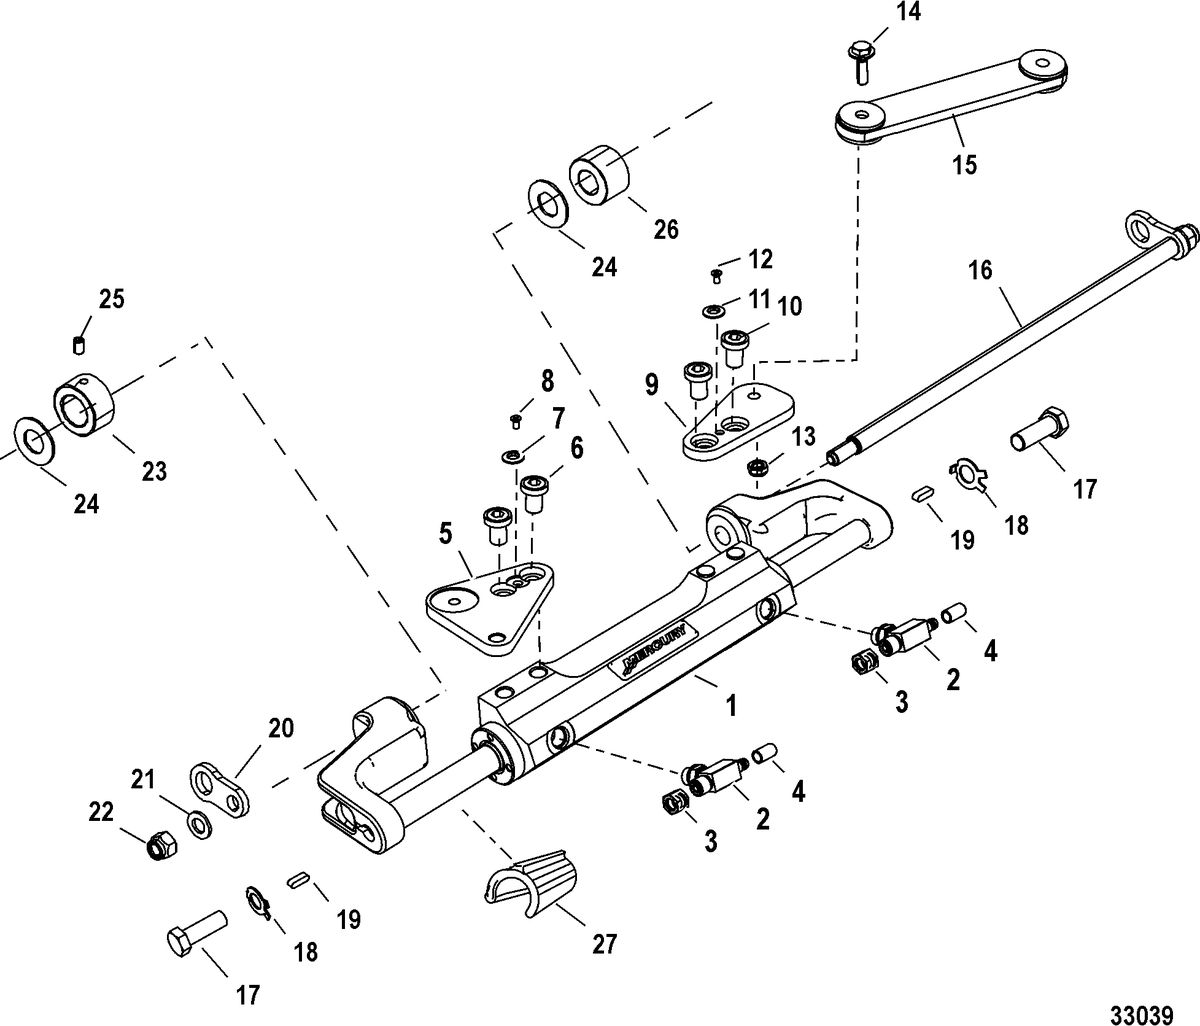 ACCESSORIES STEERING SYSTEMS AND COMPONENTS Steering Actuator Assembly(898349A04)